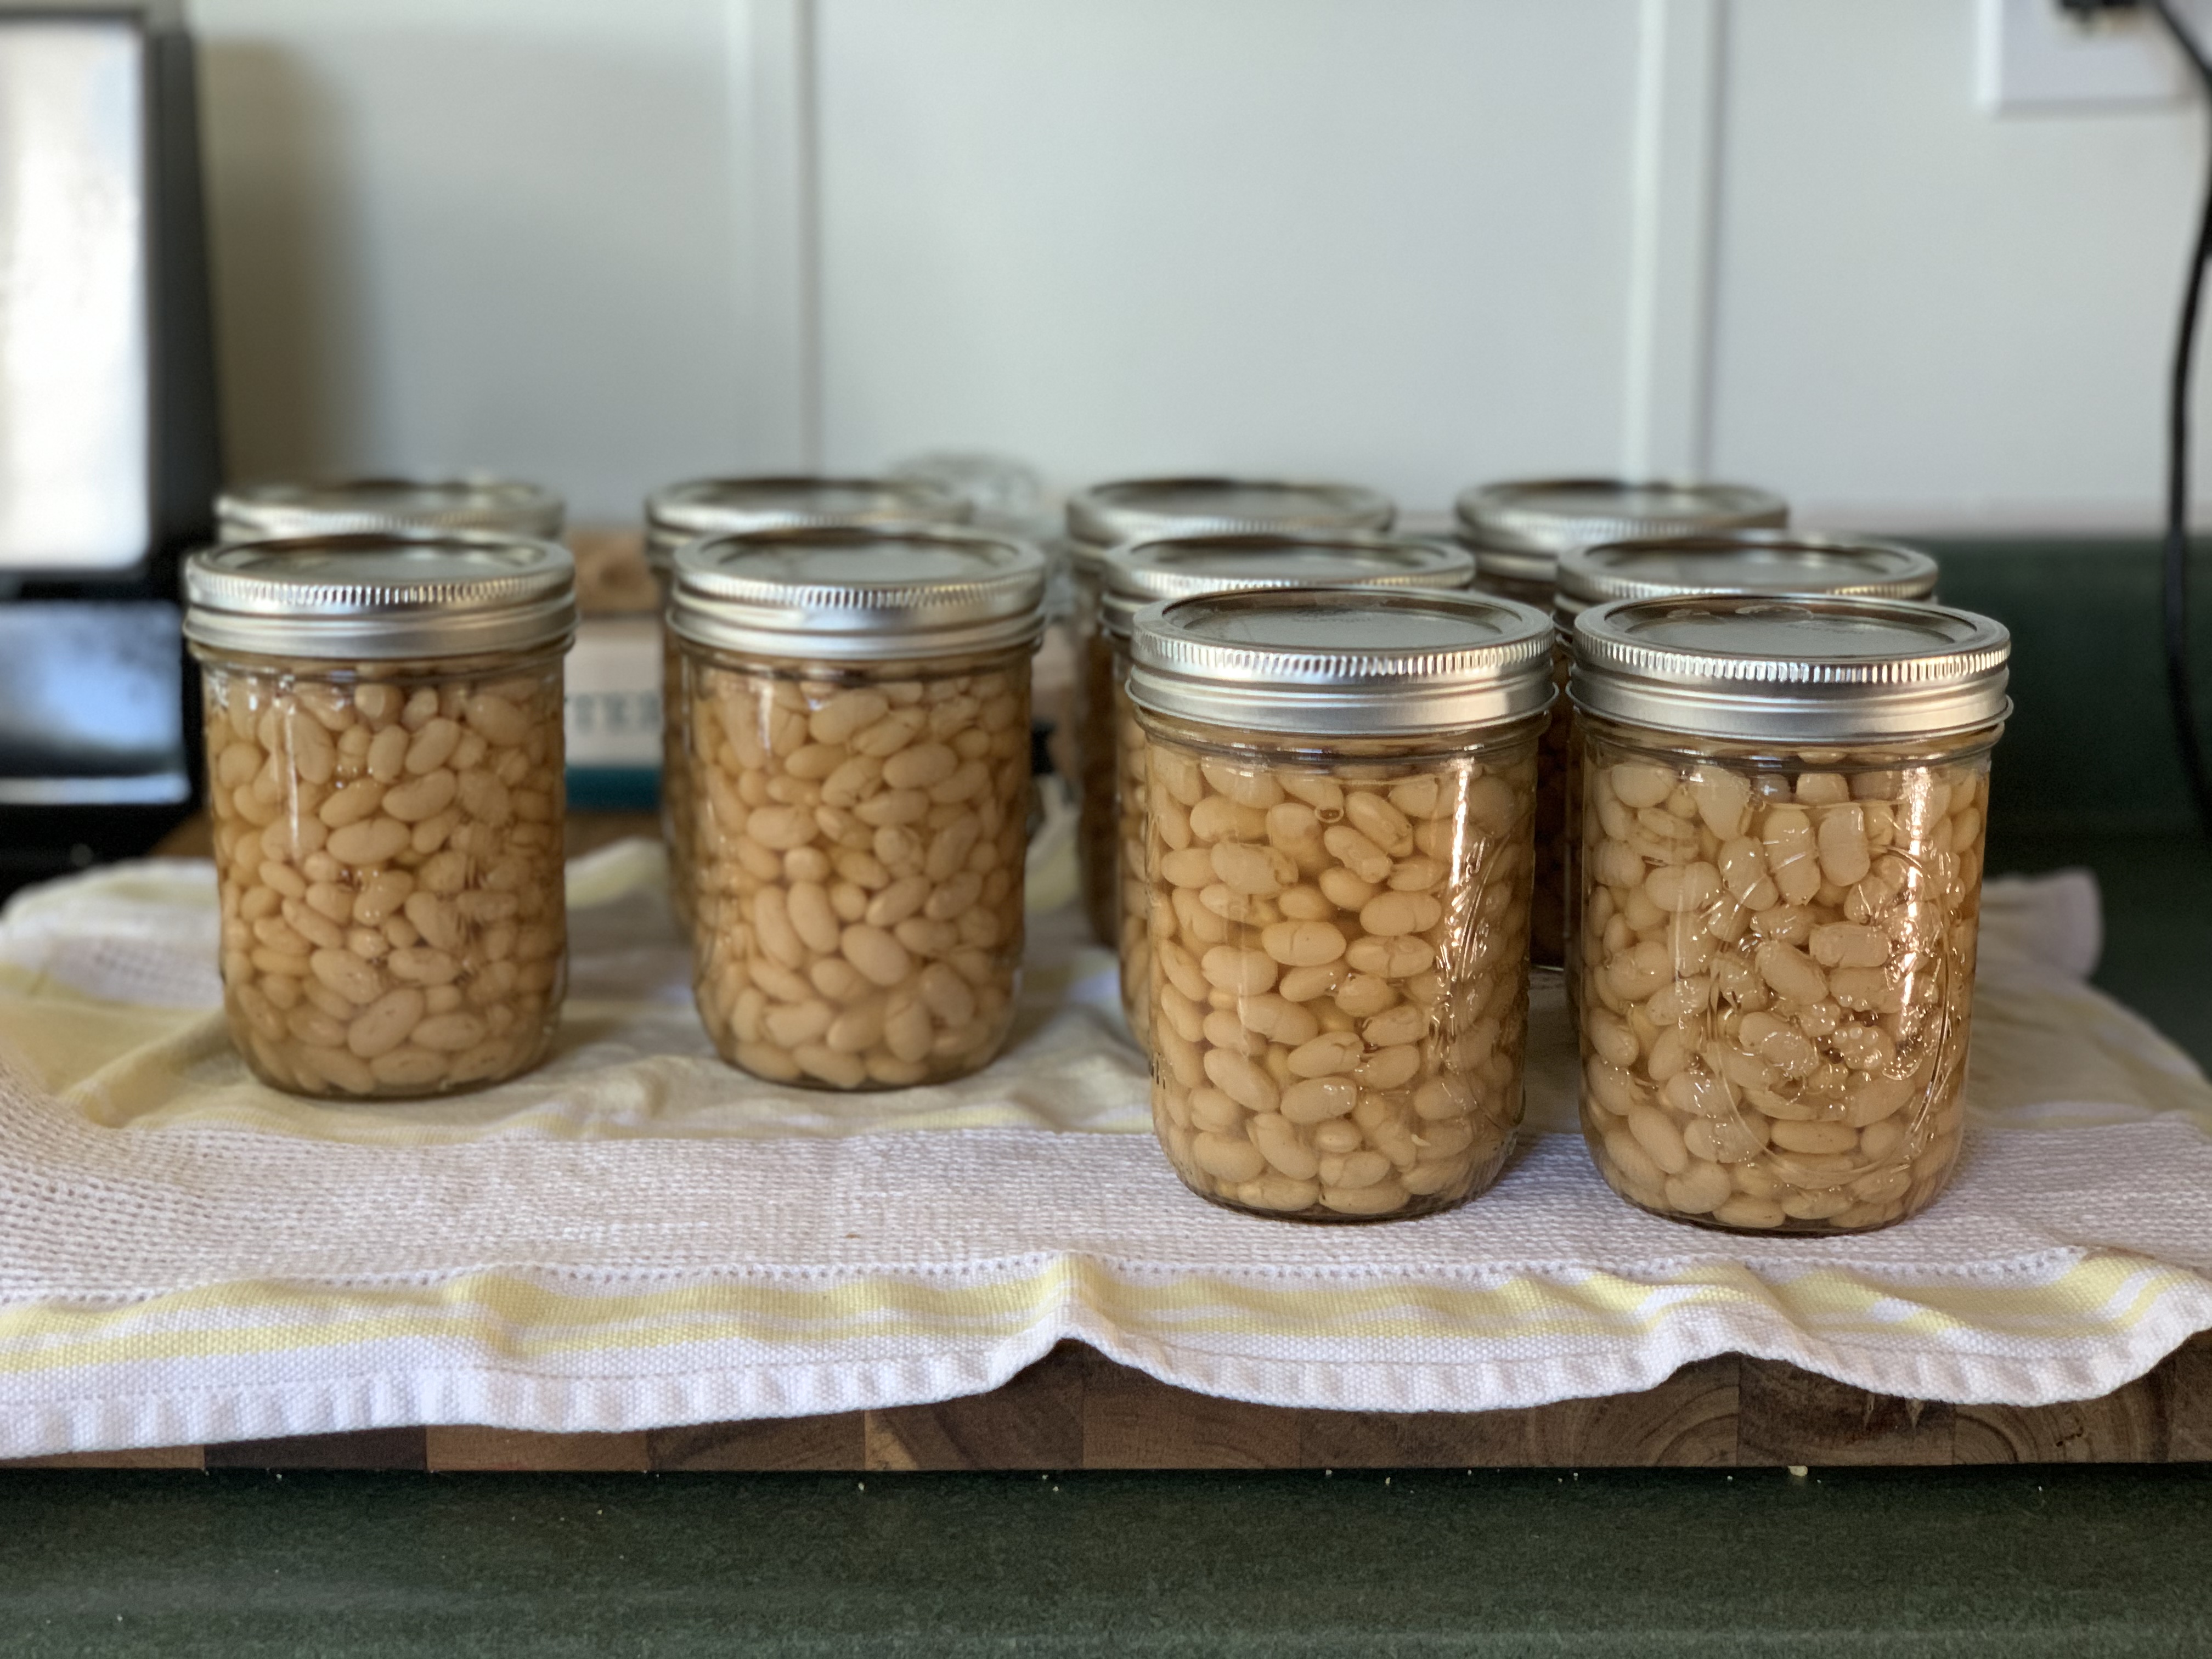 10 jars of cannellini beans canned and cooling on towel